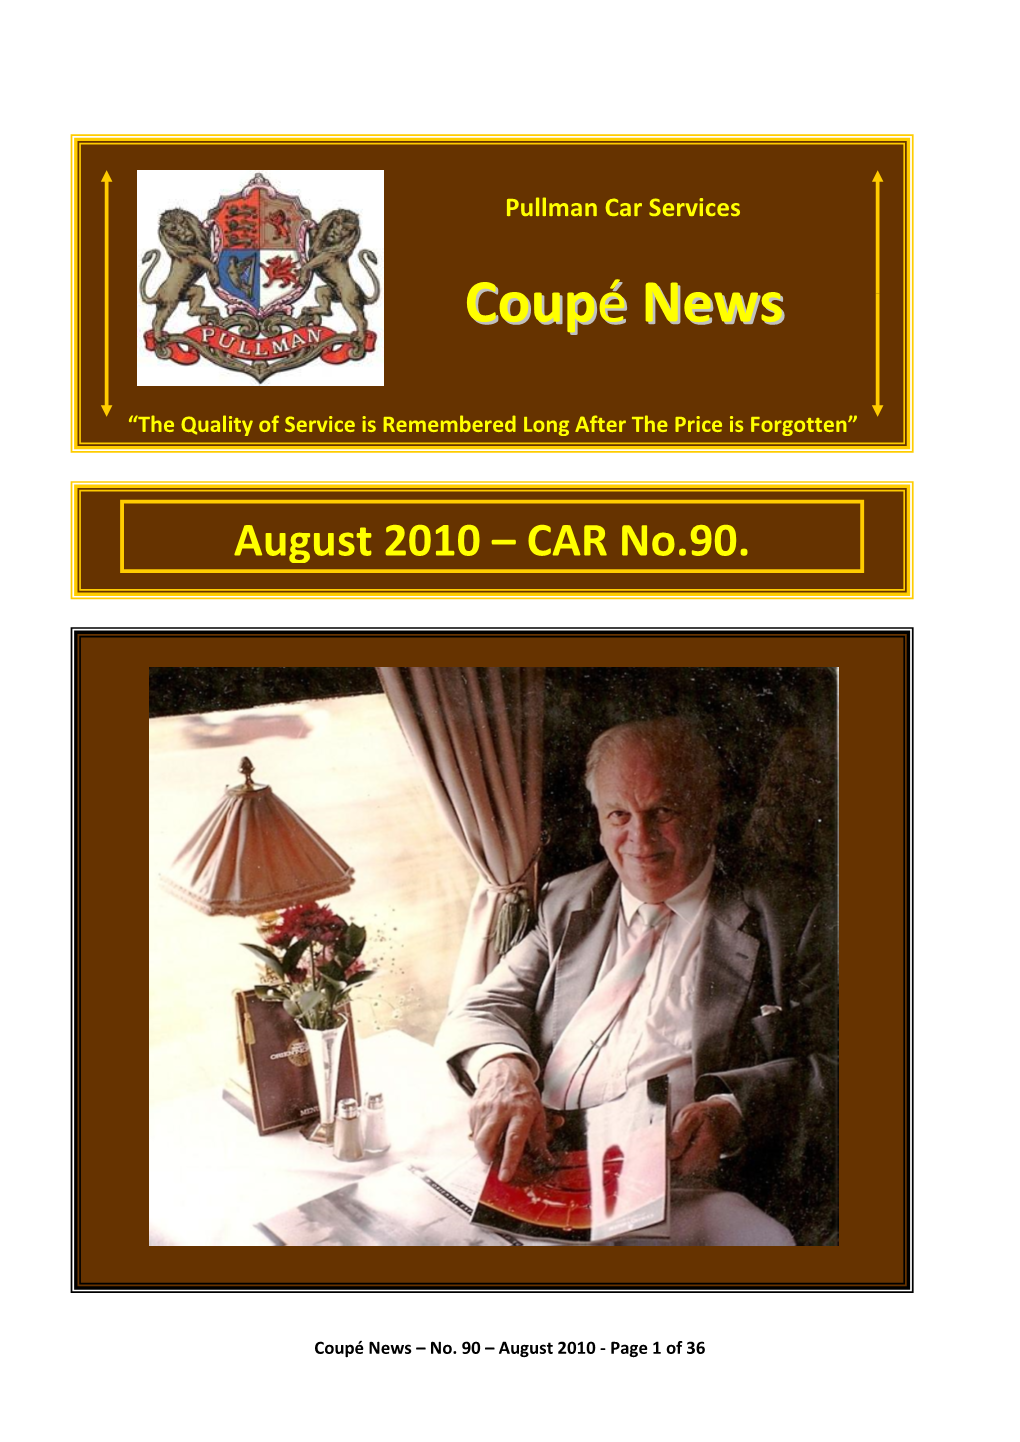 Coupe News Special Edition No.6 - 50 Years of Tri-Ang - Hornby Pullmans 1958 to 2008)